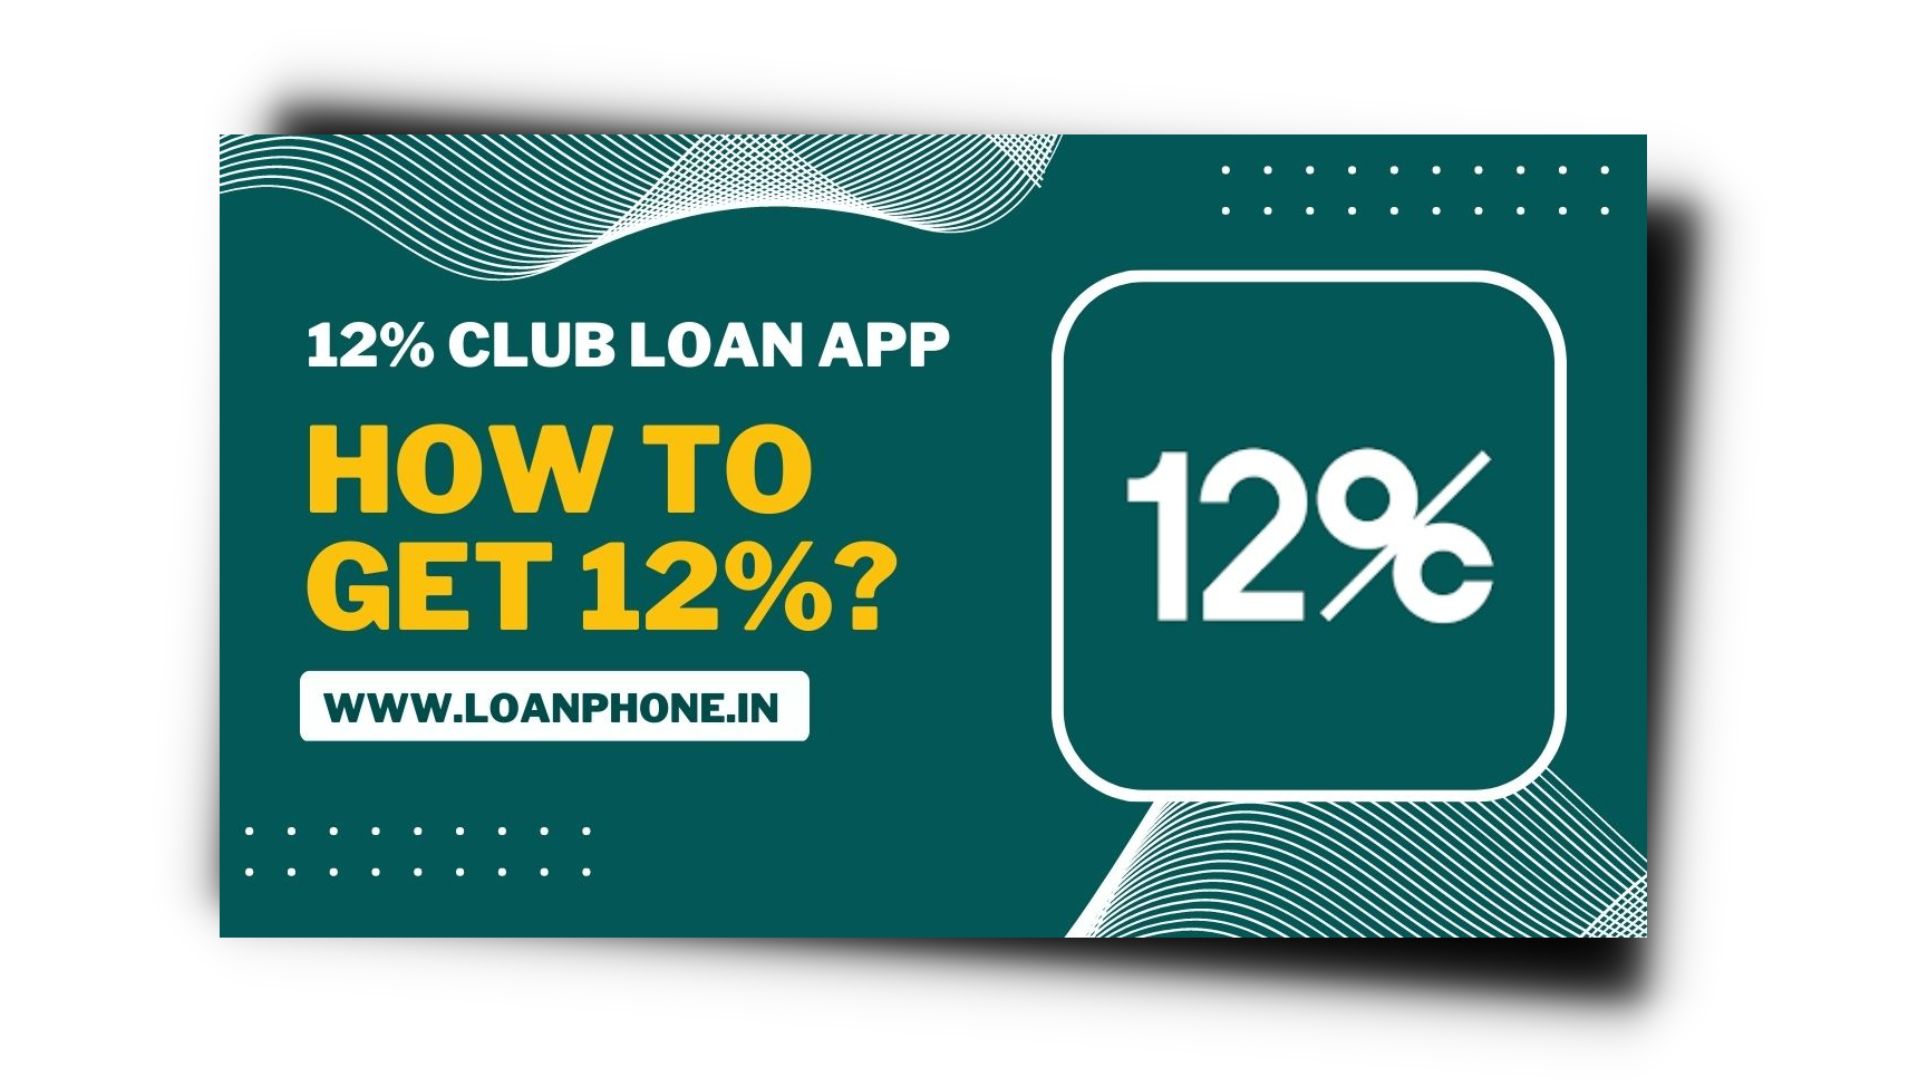 12% Club Loan App Review | How To Get 12% WIth 12% Club App